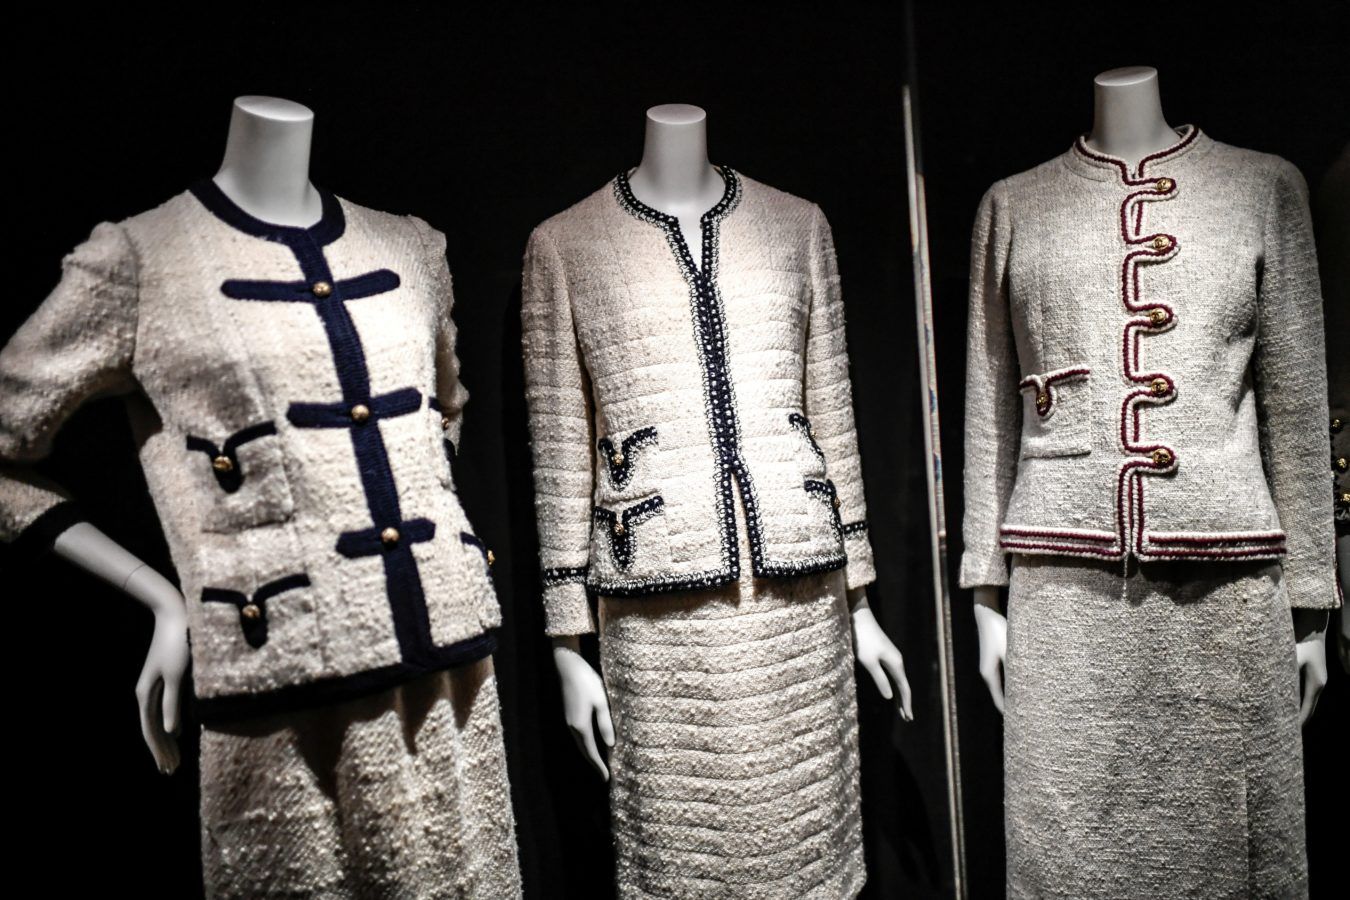 coco chanel early designs